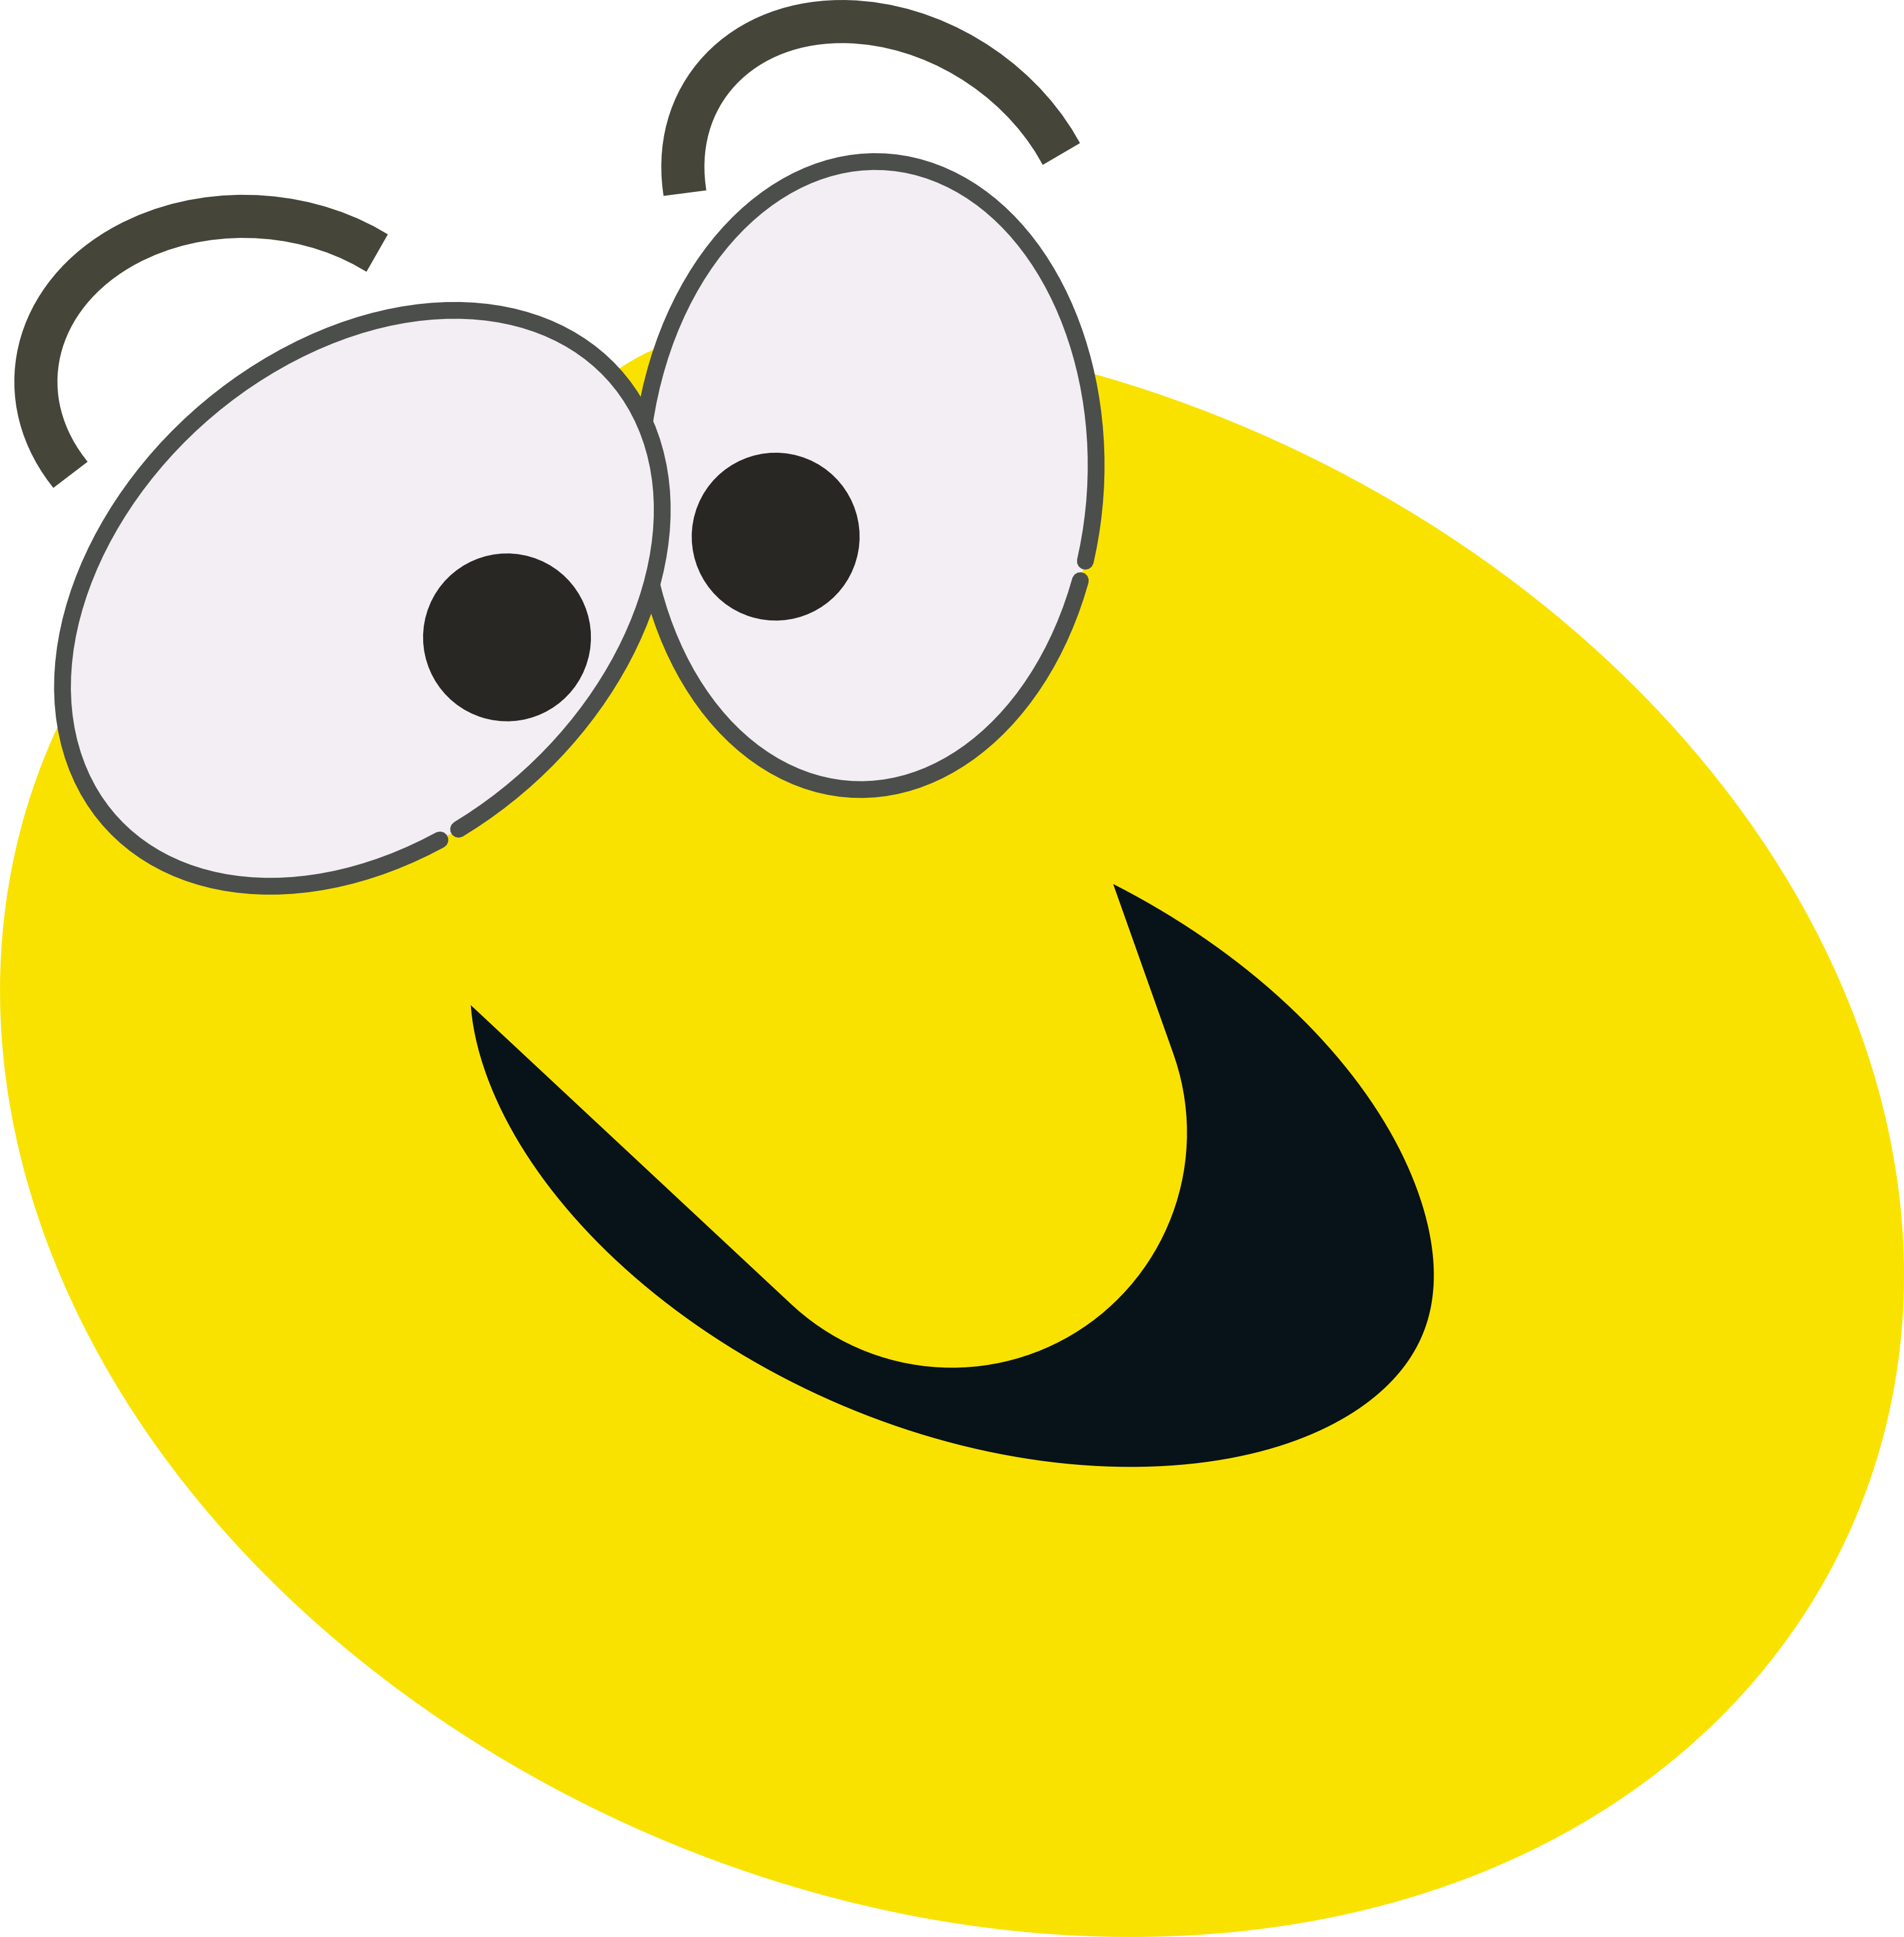 Smile smiling star face vector clip art - Cliparting.com